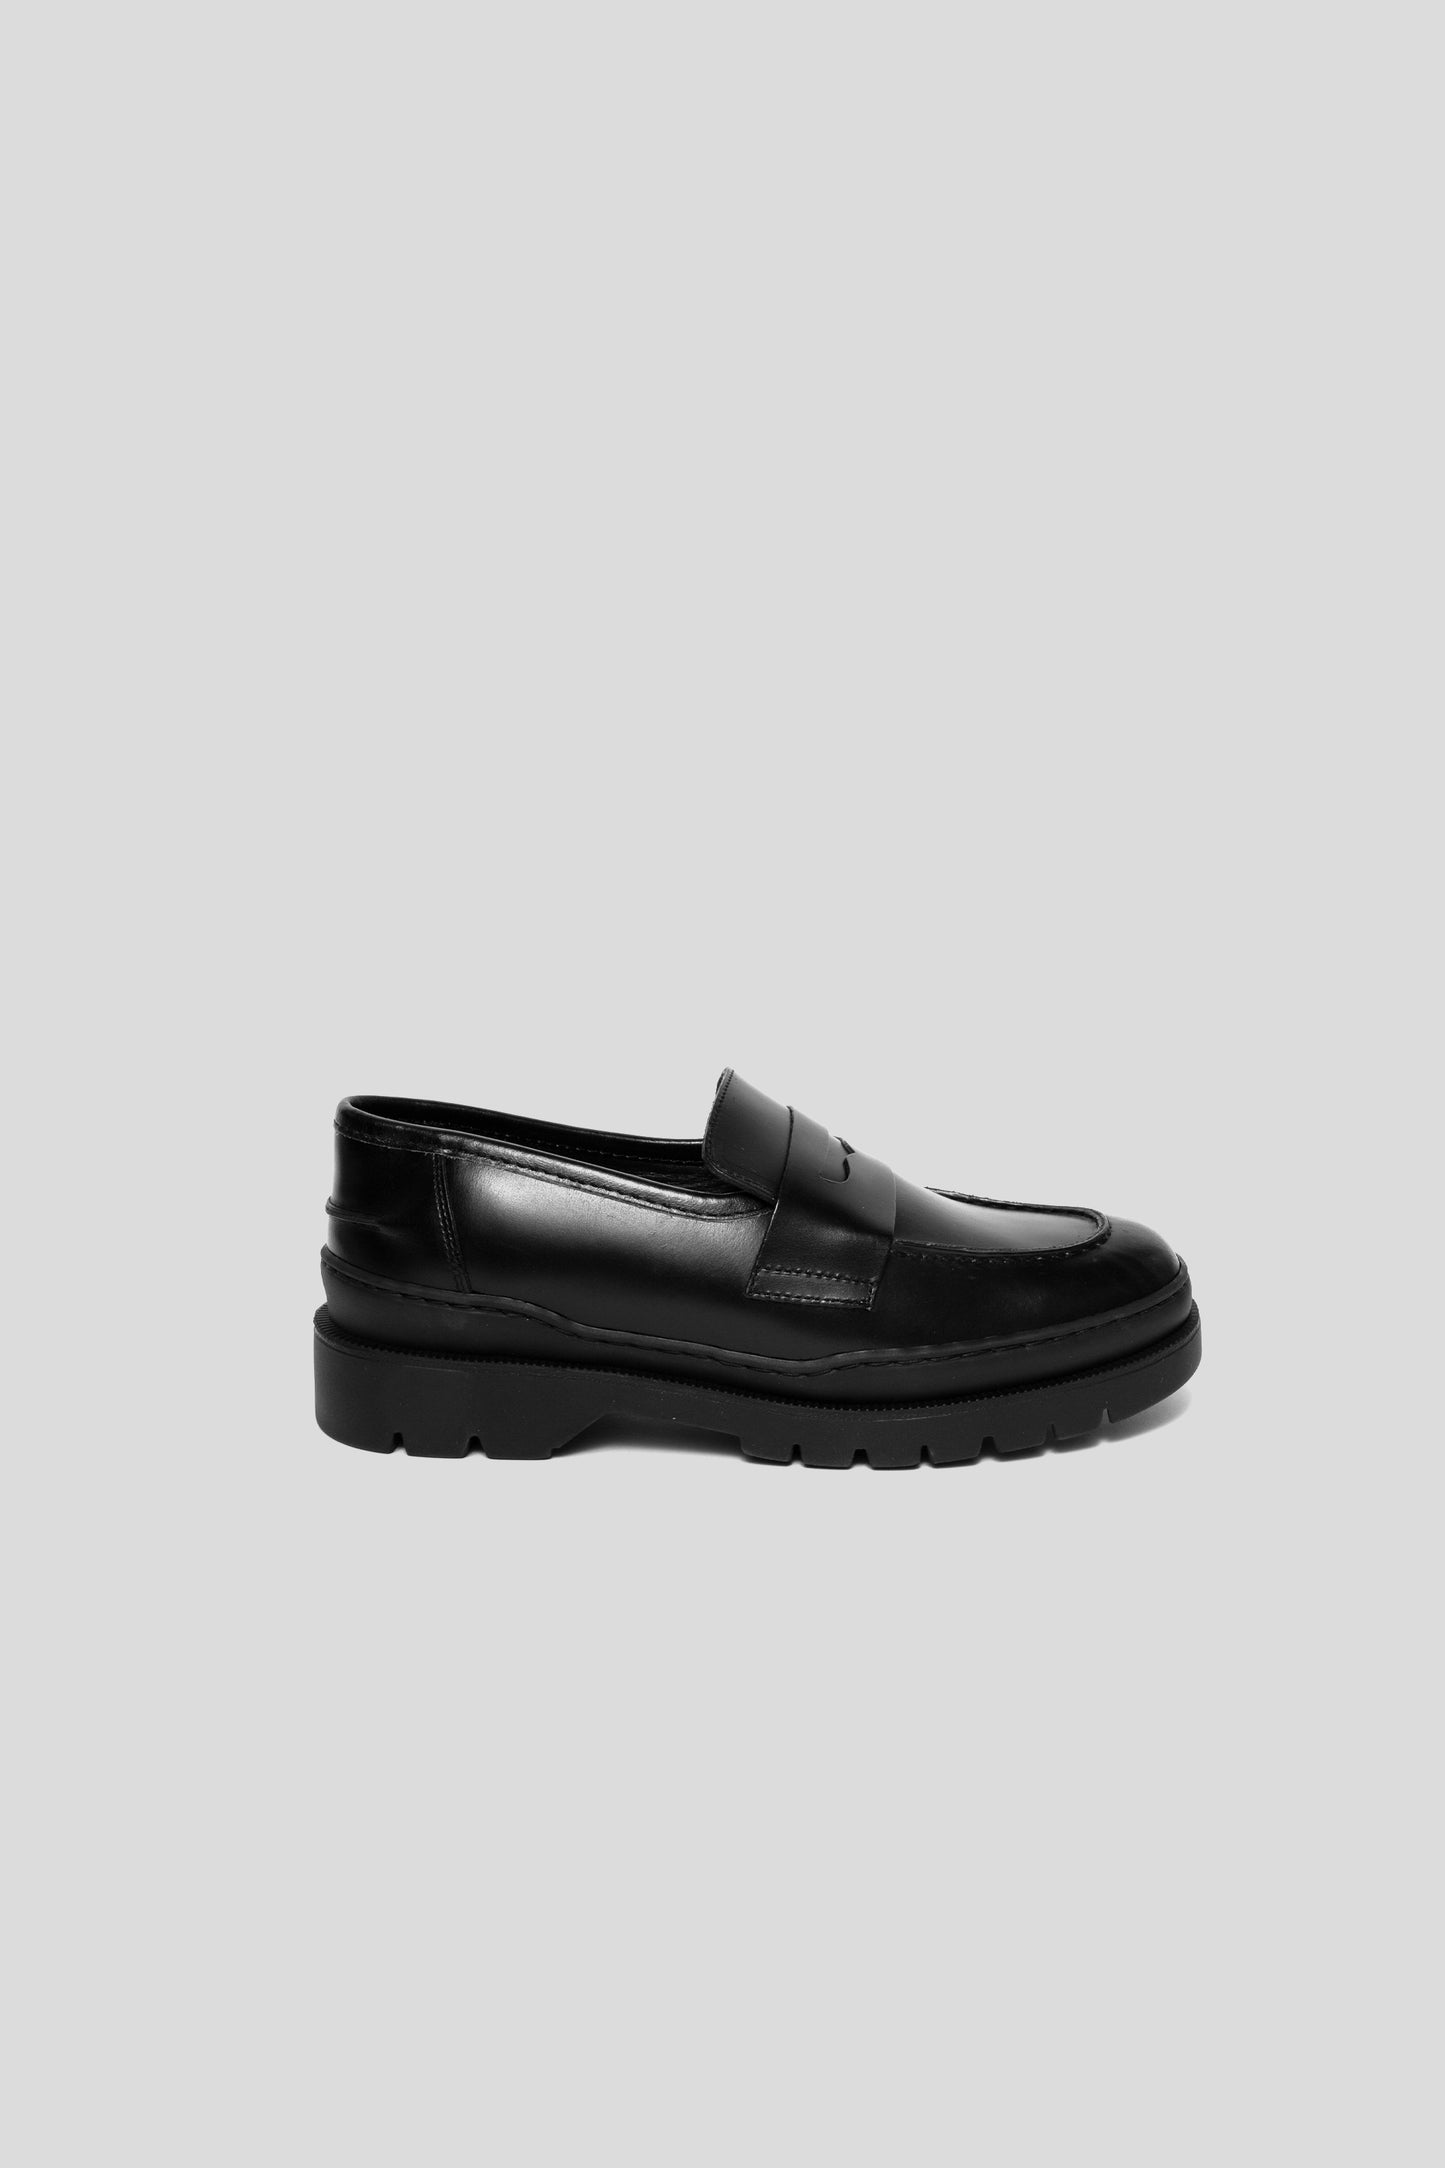 Women's Kleman A ccore M VGT Loafer in Black